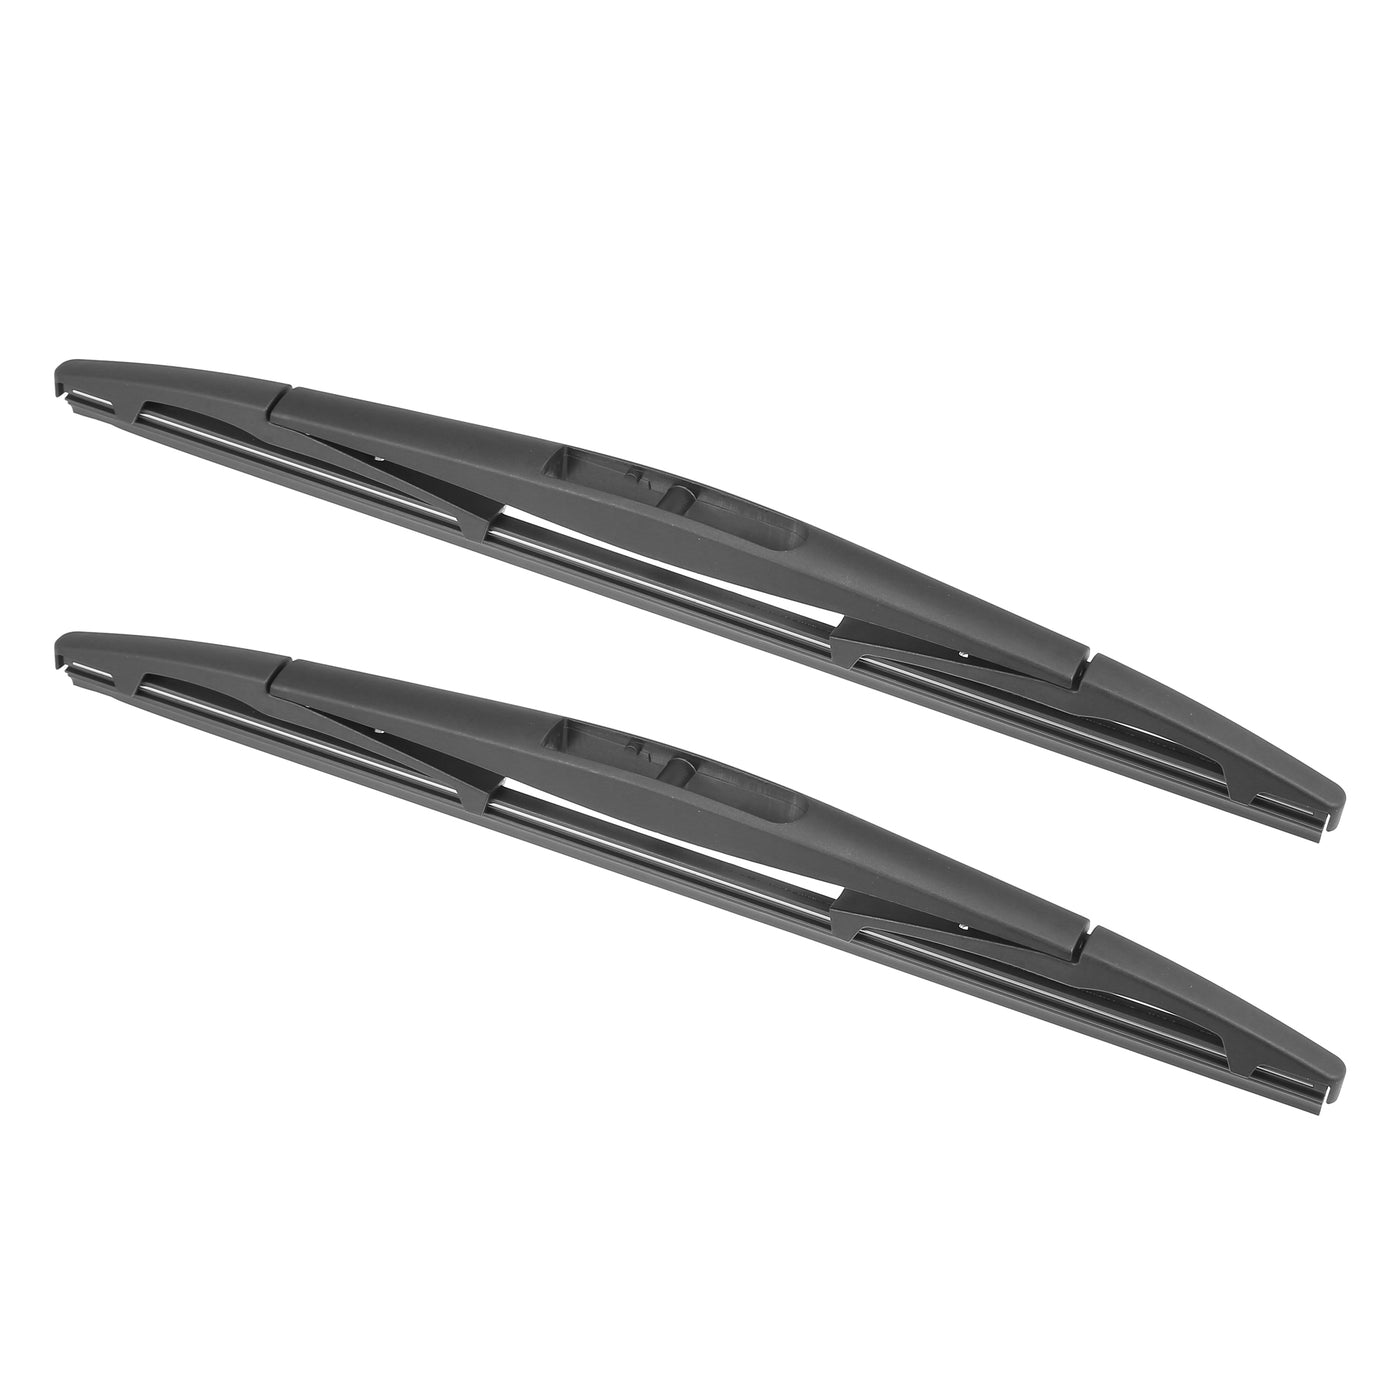 X AUTOHAUX 2pcs Rear Windshield Wiper Blade Replacement for Honda CR-V 2017-2022 for Nissan Pathfinder 2006-2012 for Mitsubishi Outlander 2007-2020